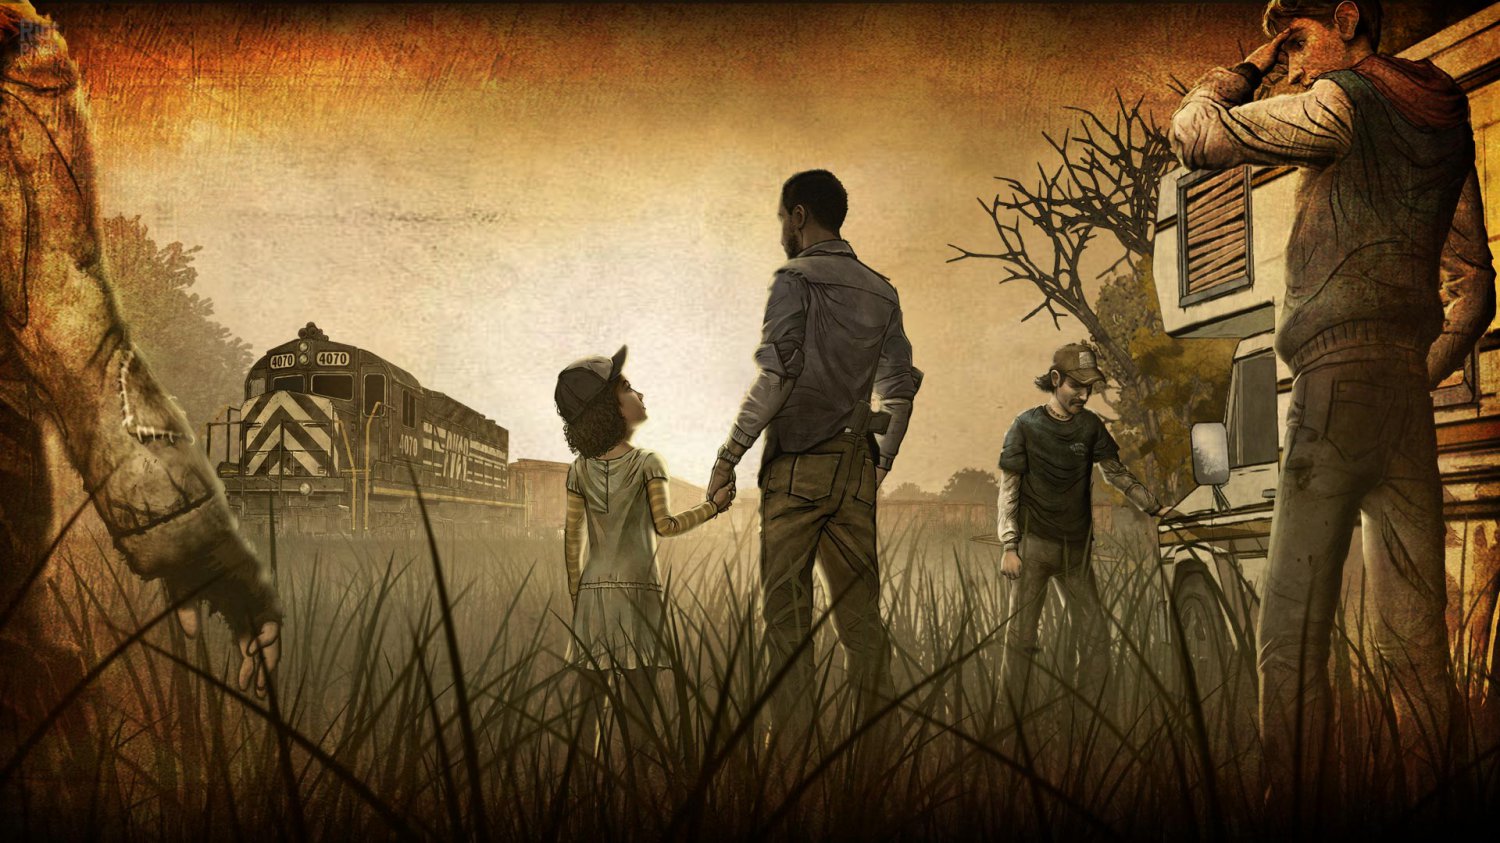 The Walking Dead  Game  18"x28" (45cm/70cm) Poster